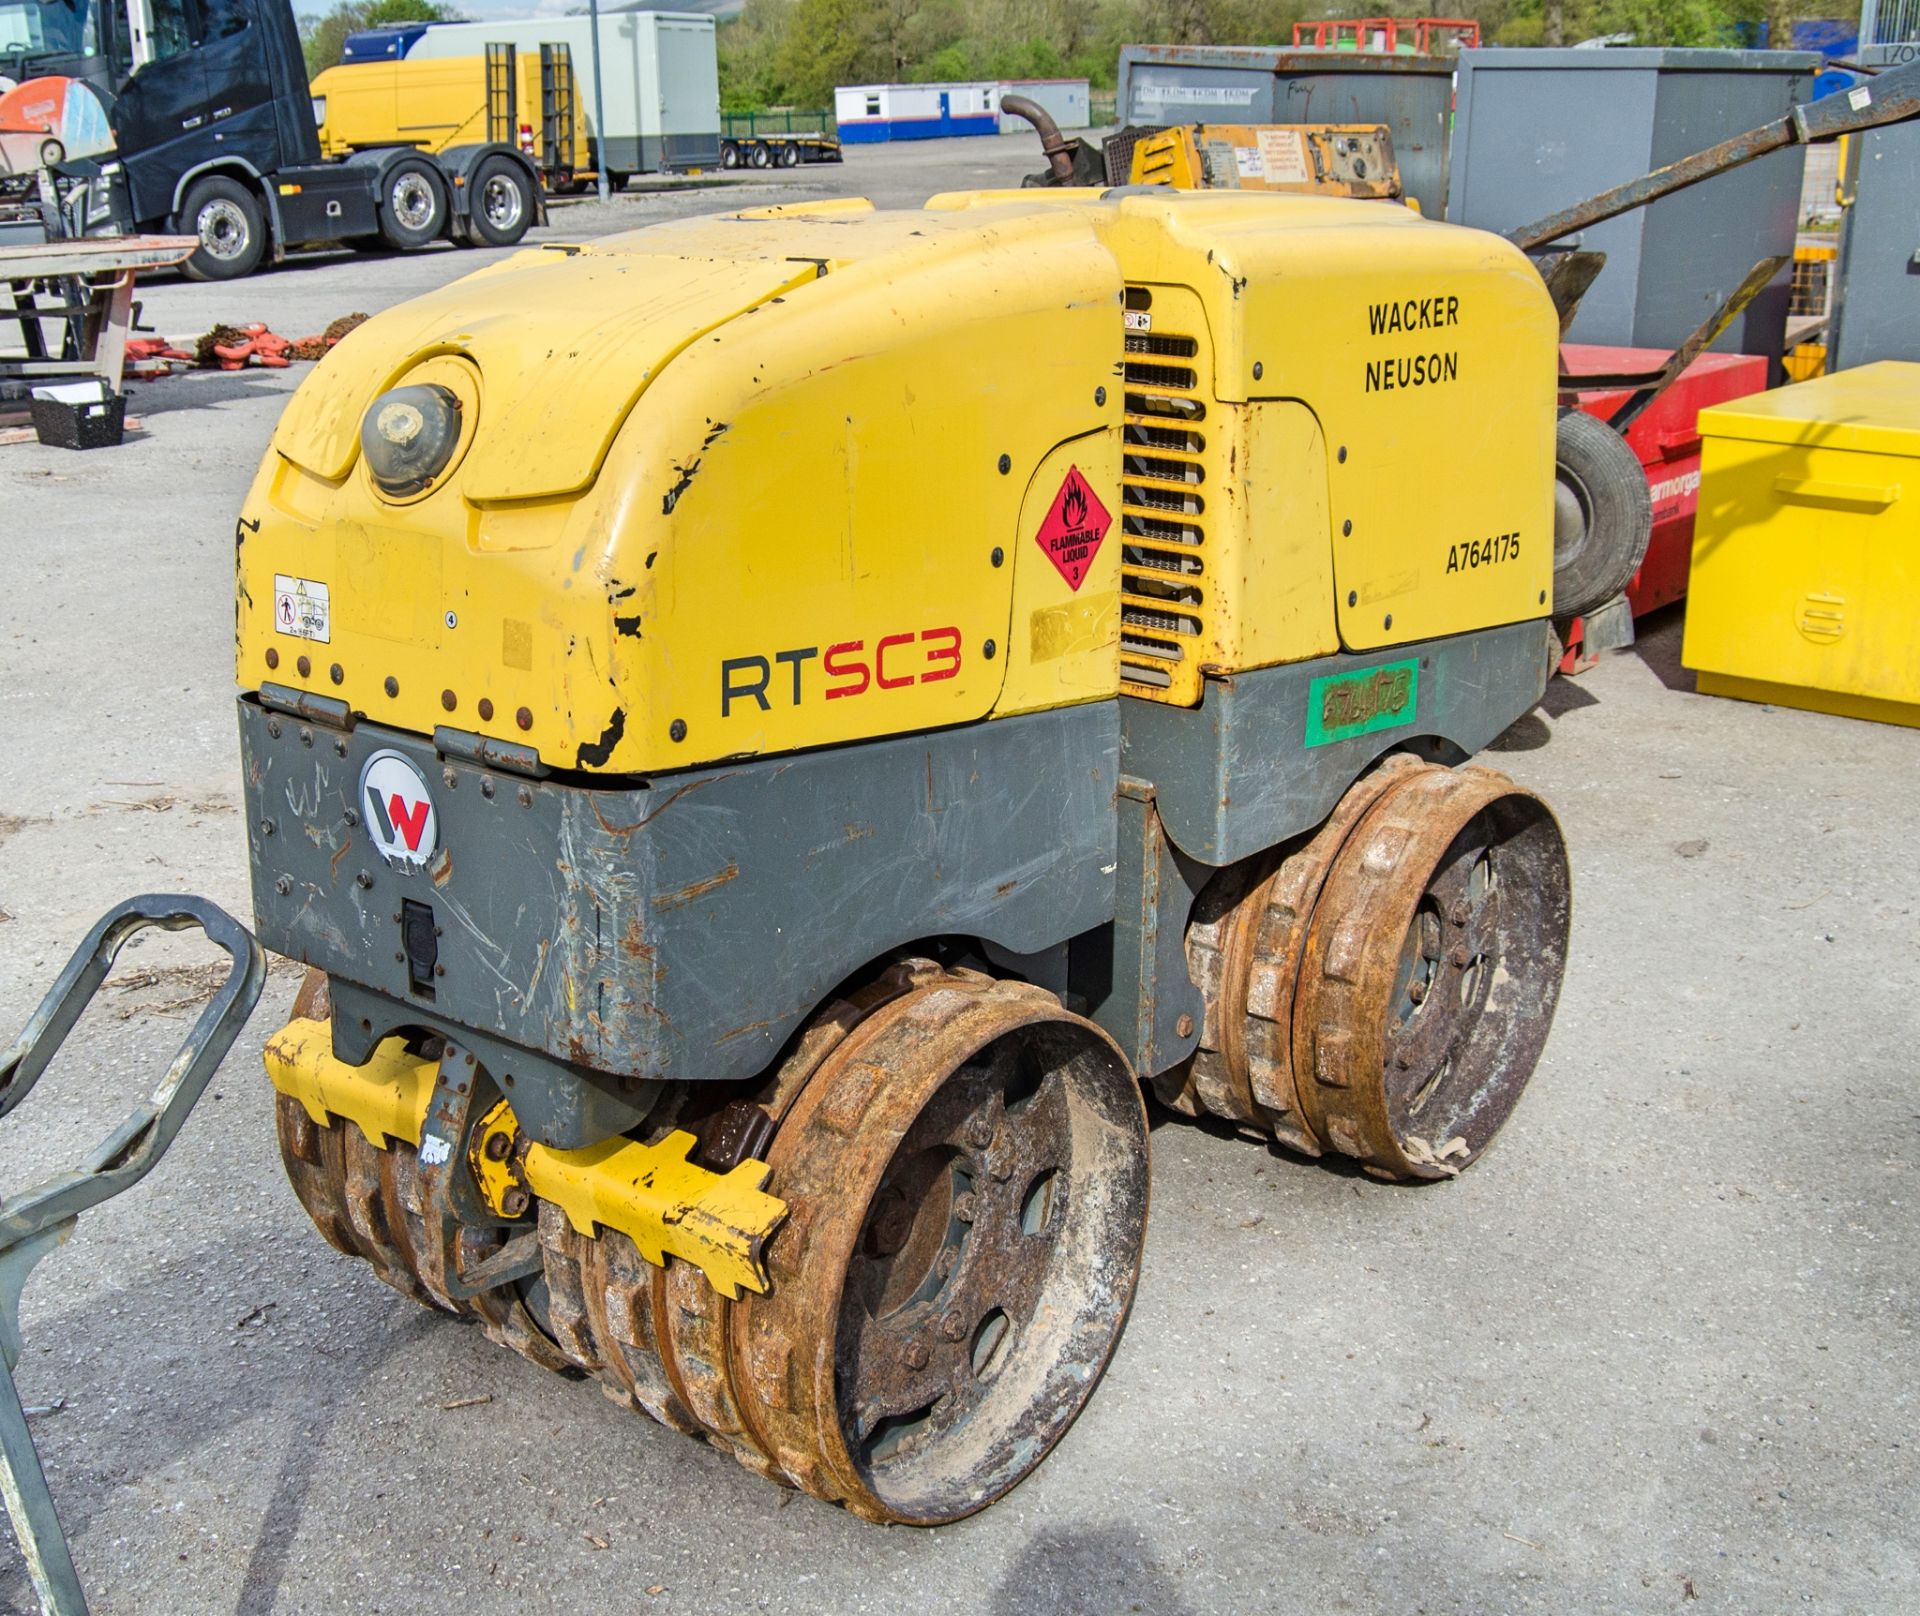 Wacker Neuson RTSC3 diesel driven trench roller Year: 2016 S/N: 24326124 Recorded Hours: 311 - Image 3 of 10